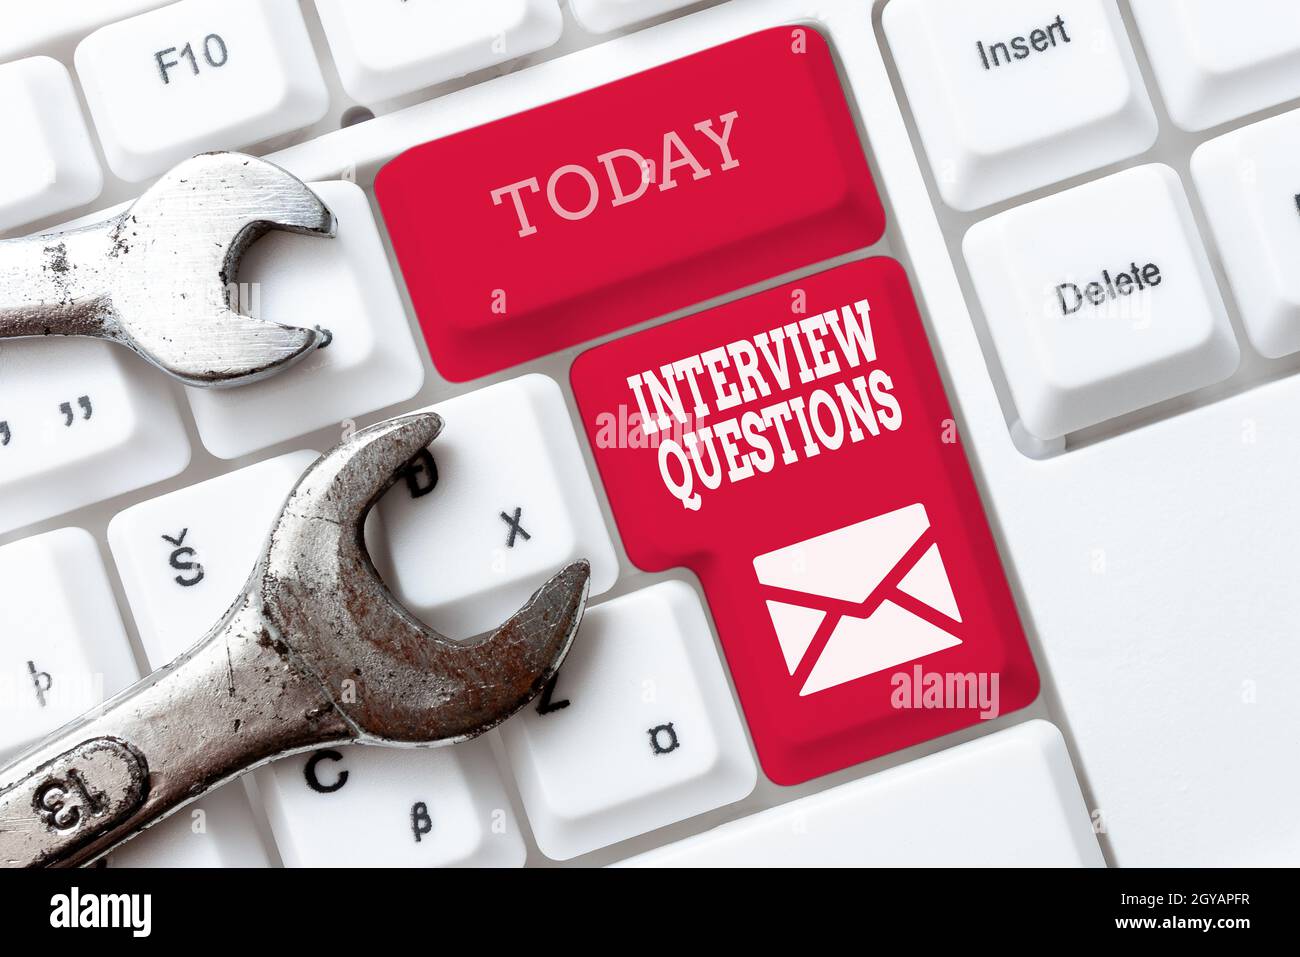 Inspiration showing sign Interview Questions, Business approach Typical topic being ask or inquire during an interview Creating New Account Password, Stock Photo